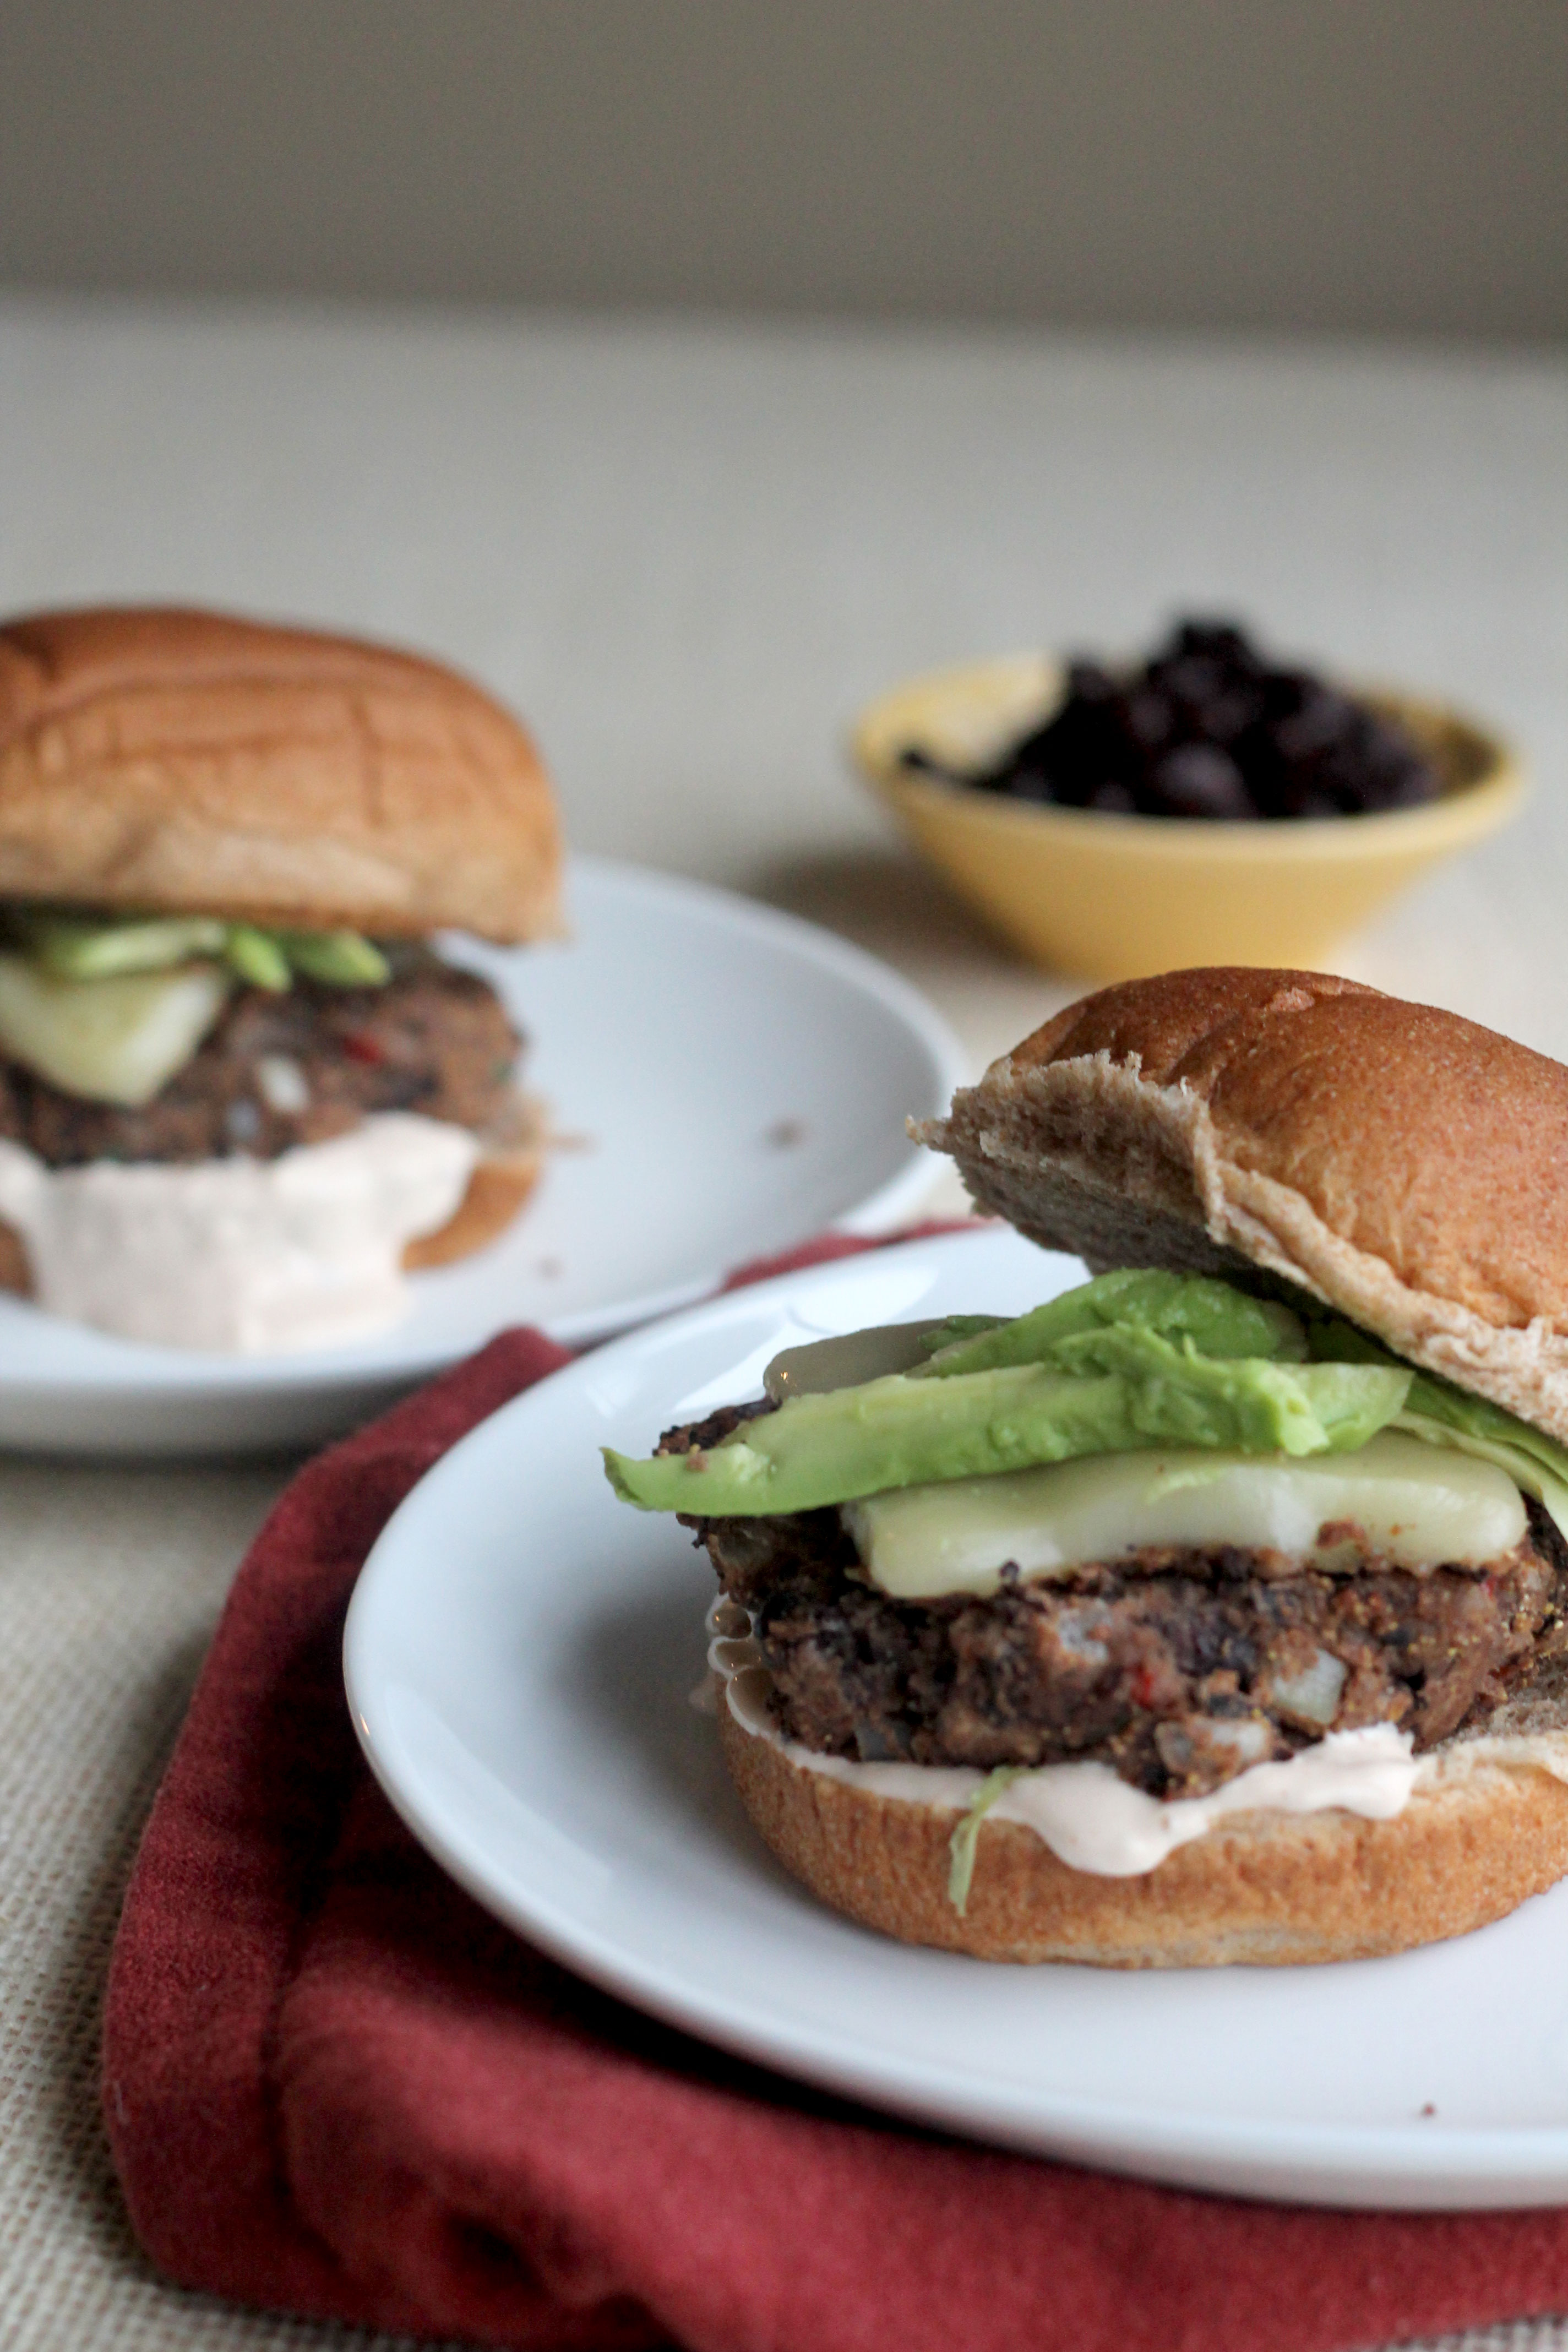 These are the best black bean burgers you will ever try!